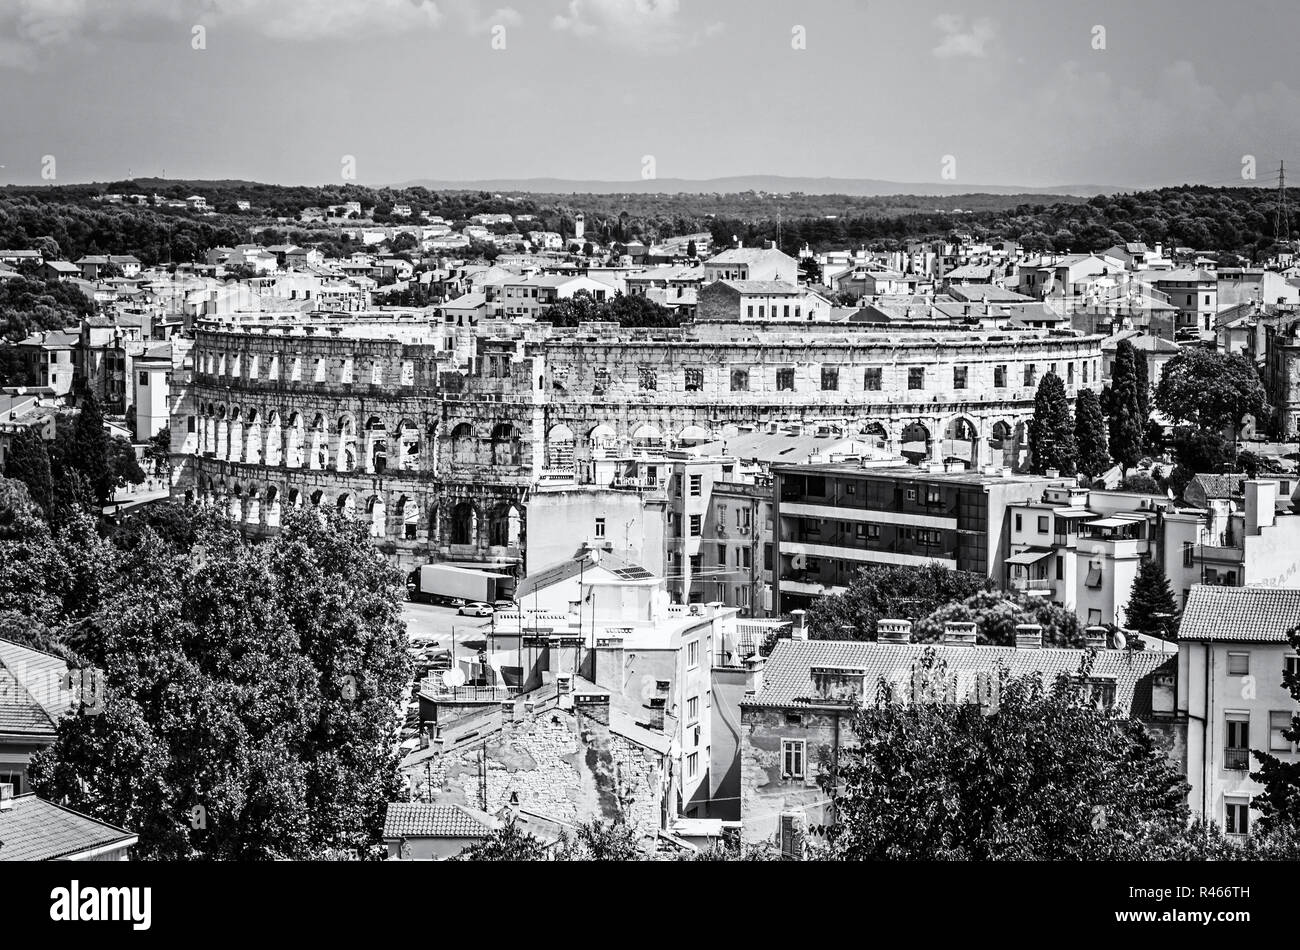 Pula Arena - ancient amphitheater located in Pula, Istria, Croatia. Travel destination. Famous object. Black and white photo. Stock Photo